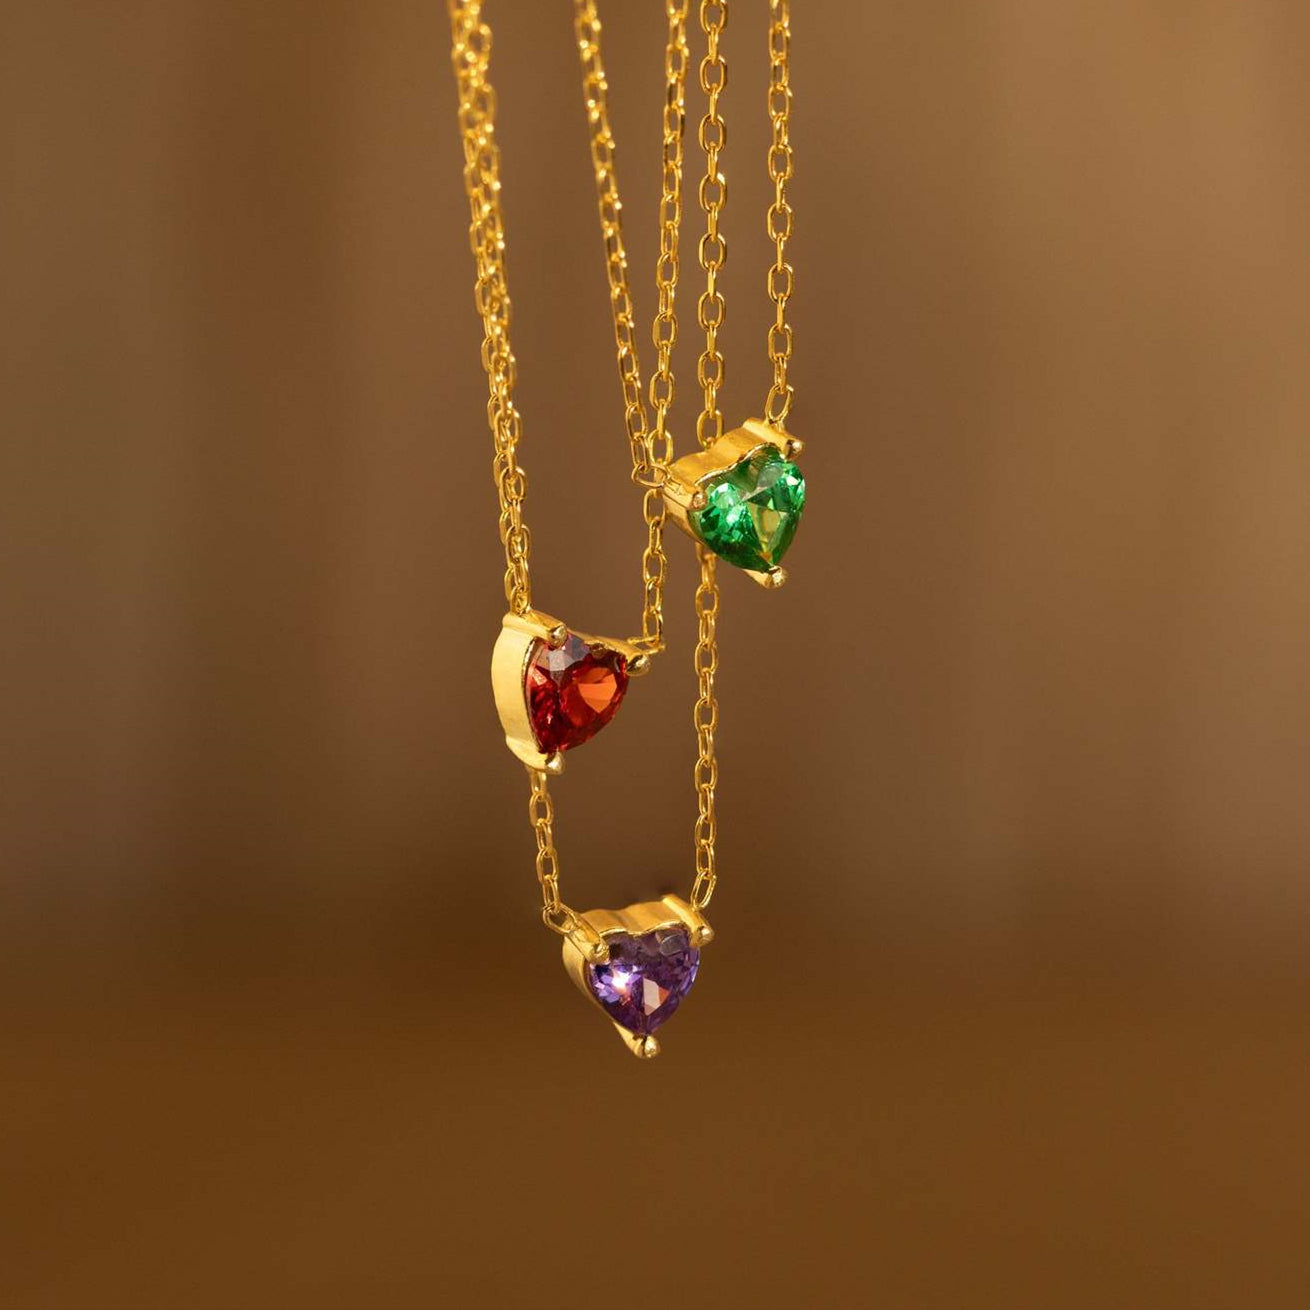 16" Small Heart Necklace Birthstone Necklace, Zircon Necklace, Stainless Steel in 18K Gold Plated, Fashion Simple Jewelry AL832